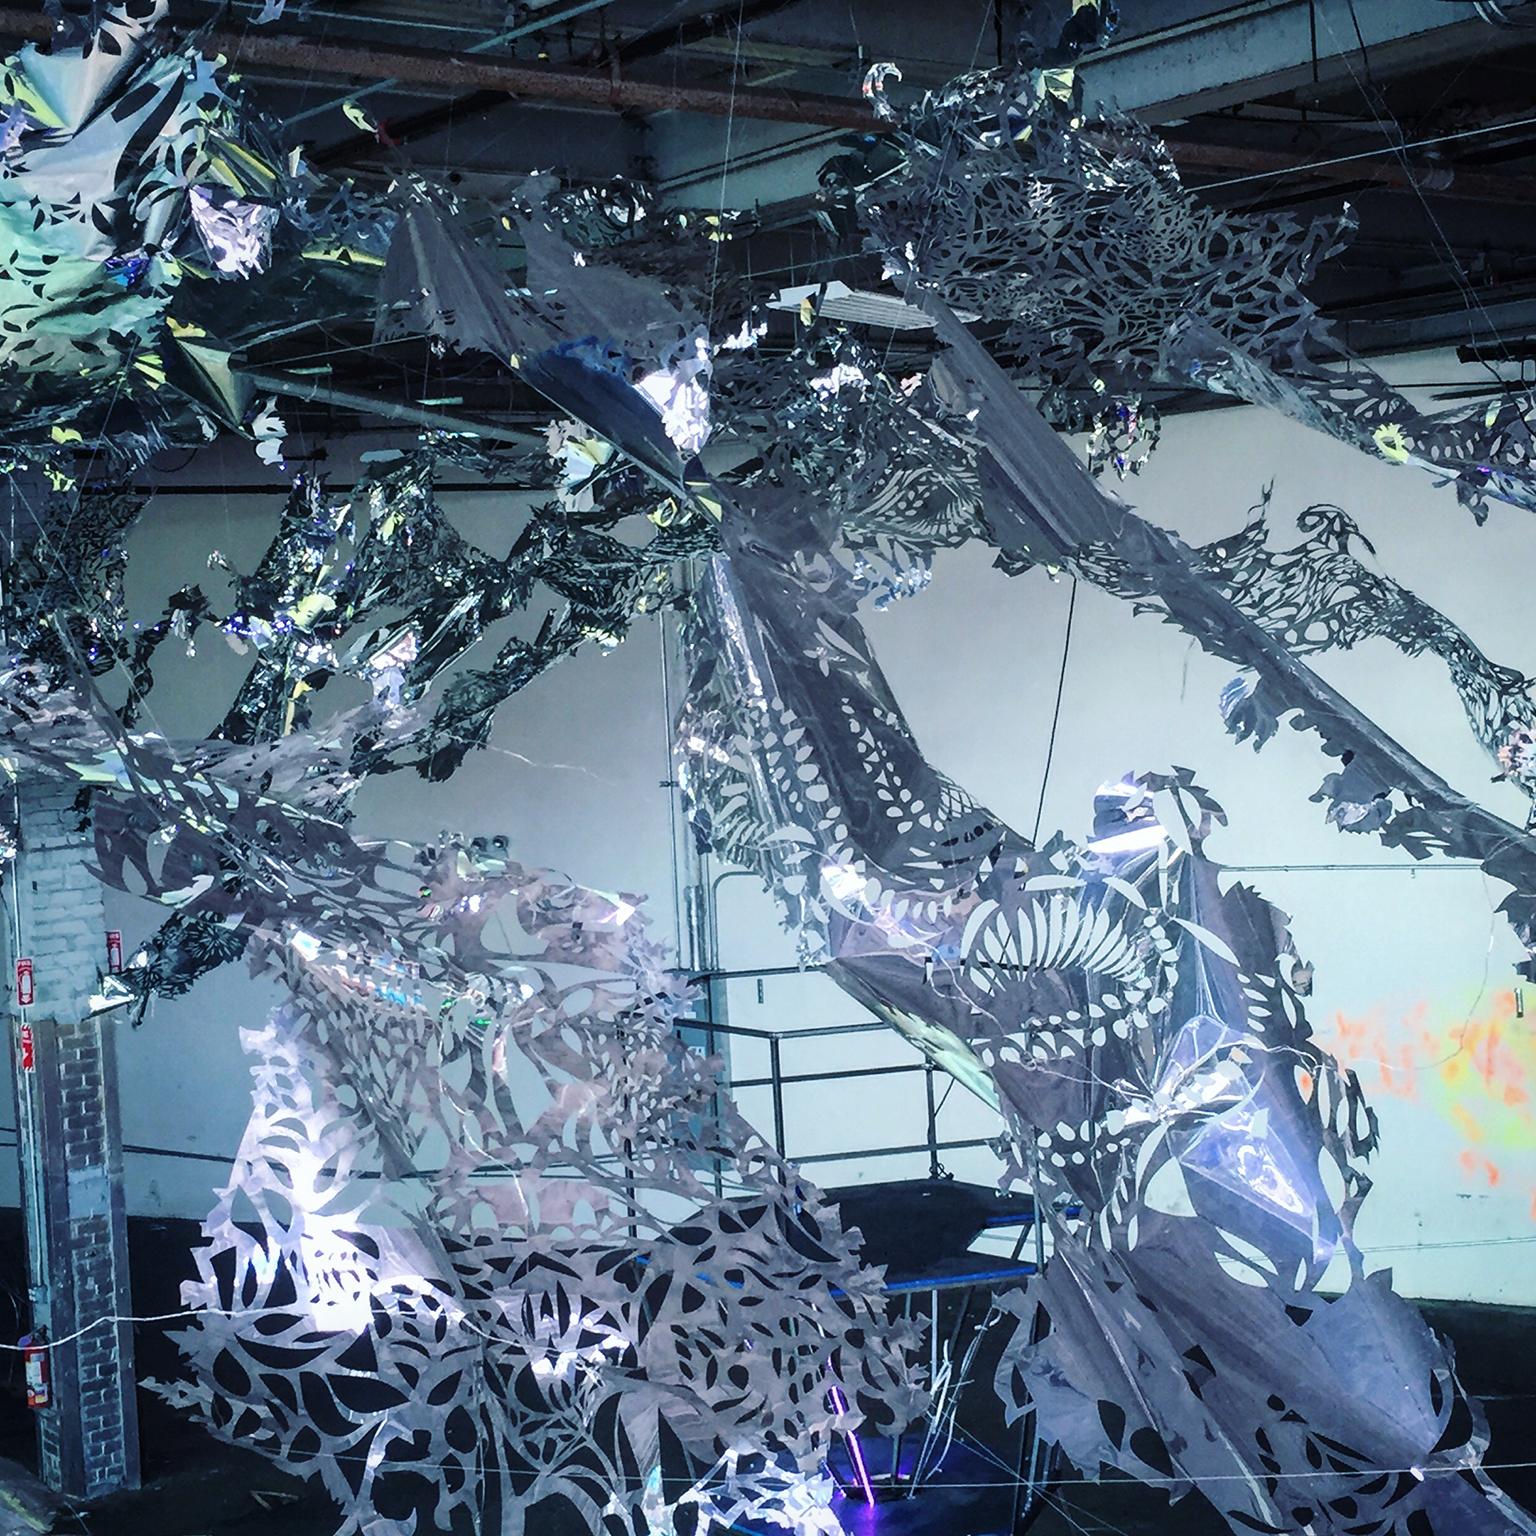 Medium: hand cut mylar

Julia Sinelnikova is an interdisciplinary artist who works with holograms, performance, and digital culture. Her light installations have been exhibited internationally, and she has performed widely as The Oracle of Vector